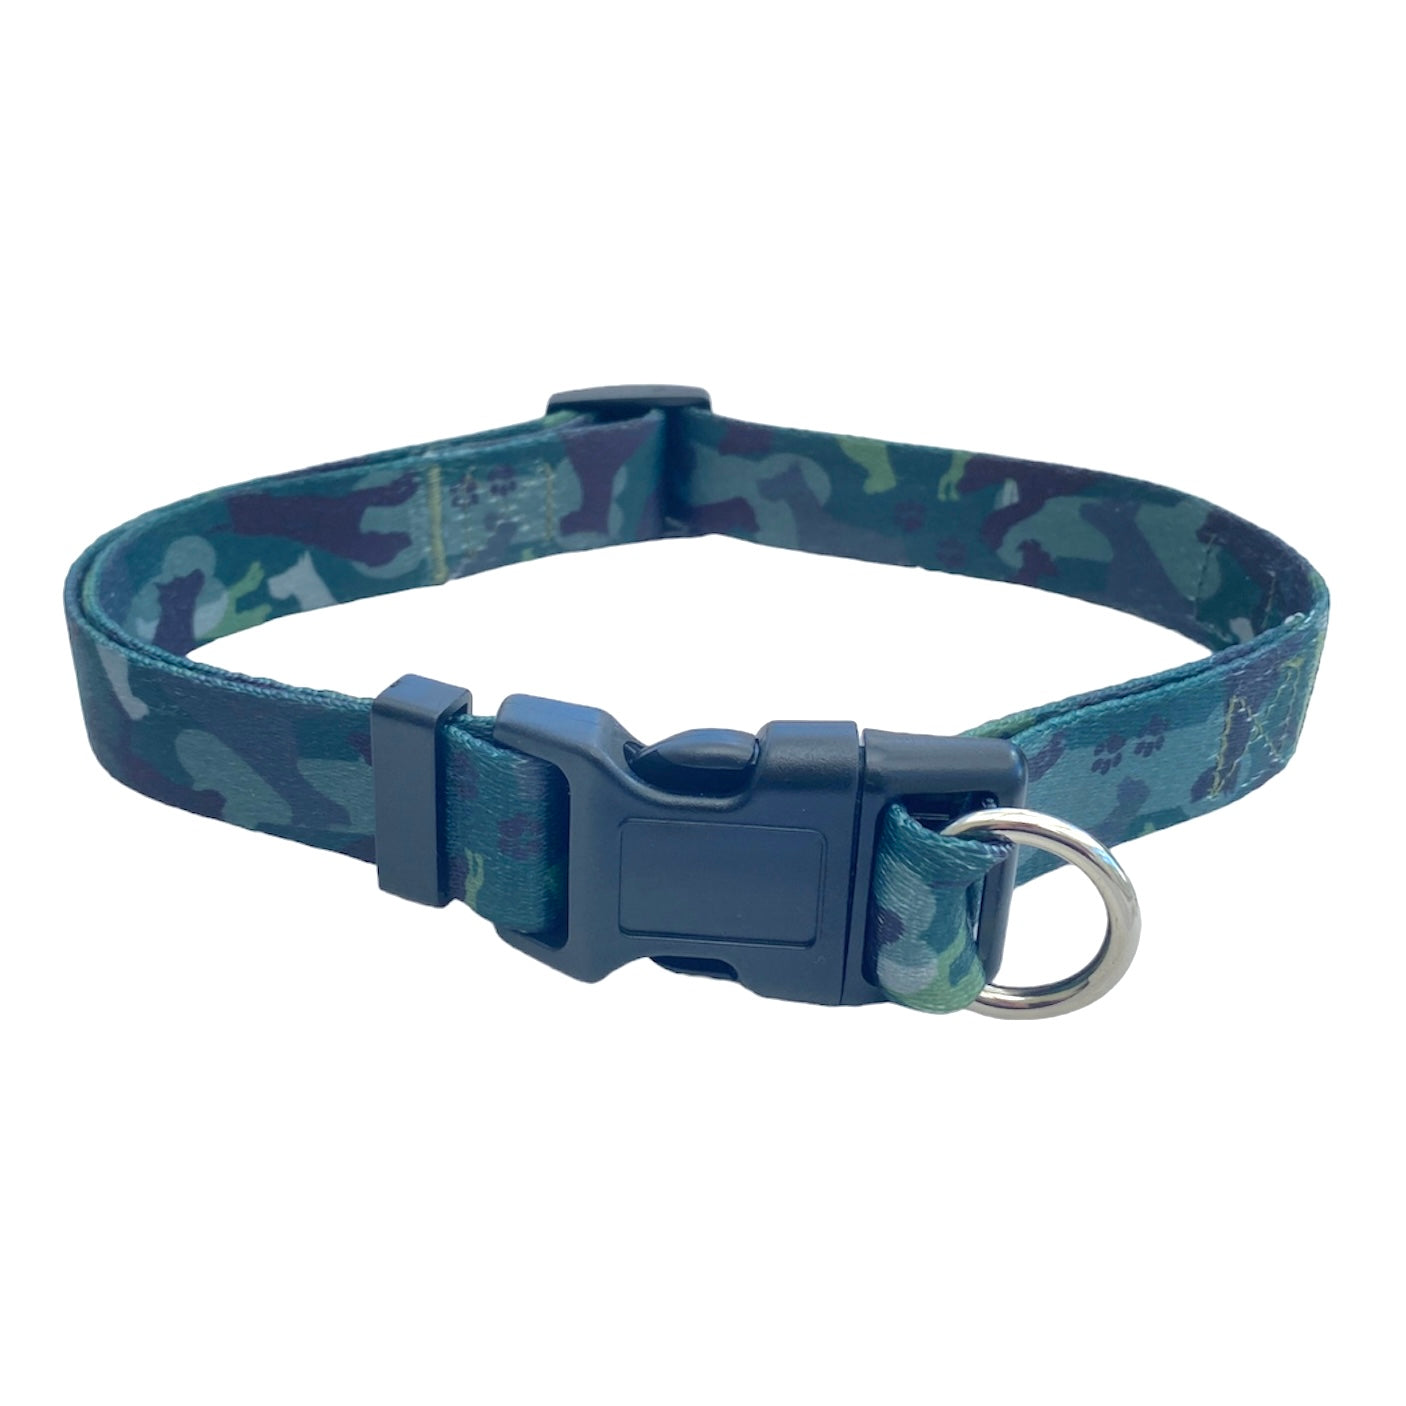 a photo of a green camouflage dog collar by fearless pet on a white background